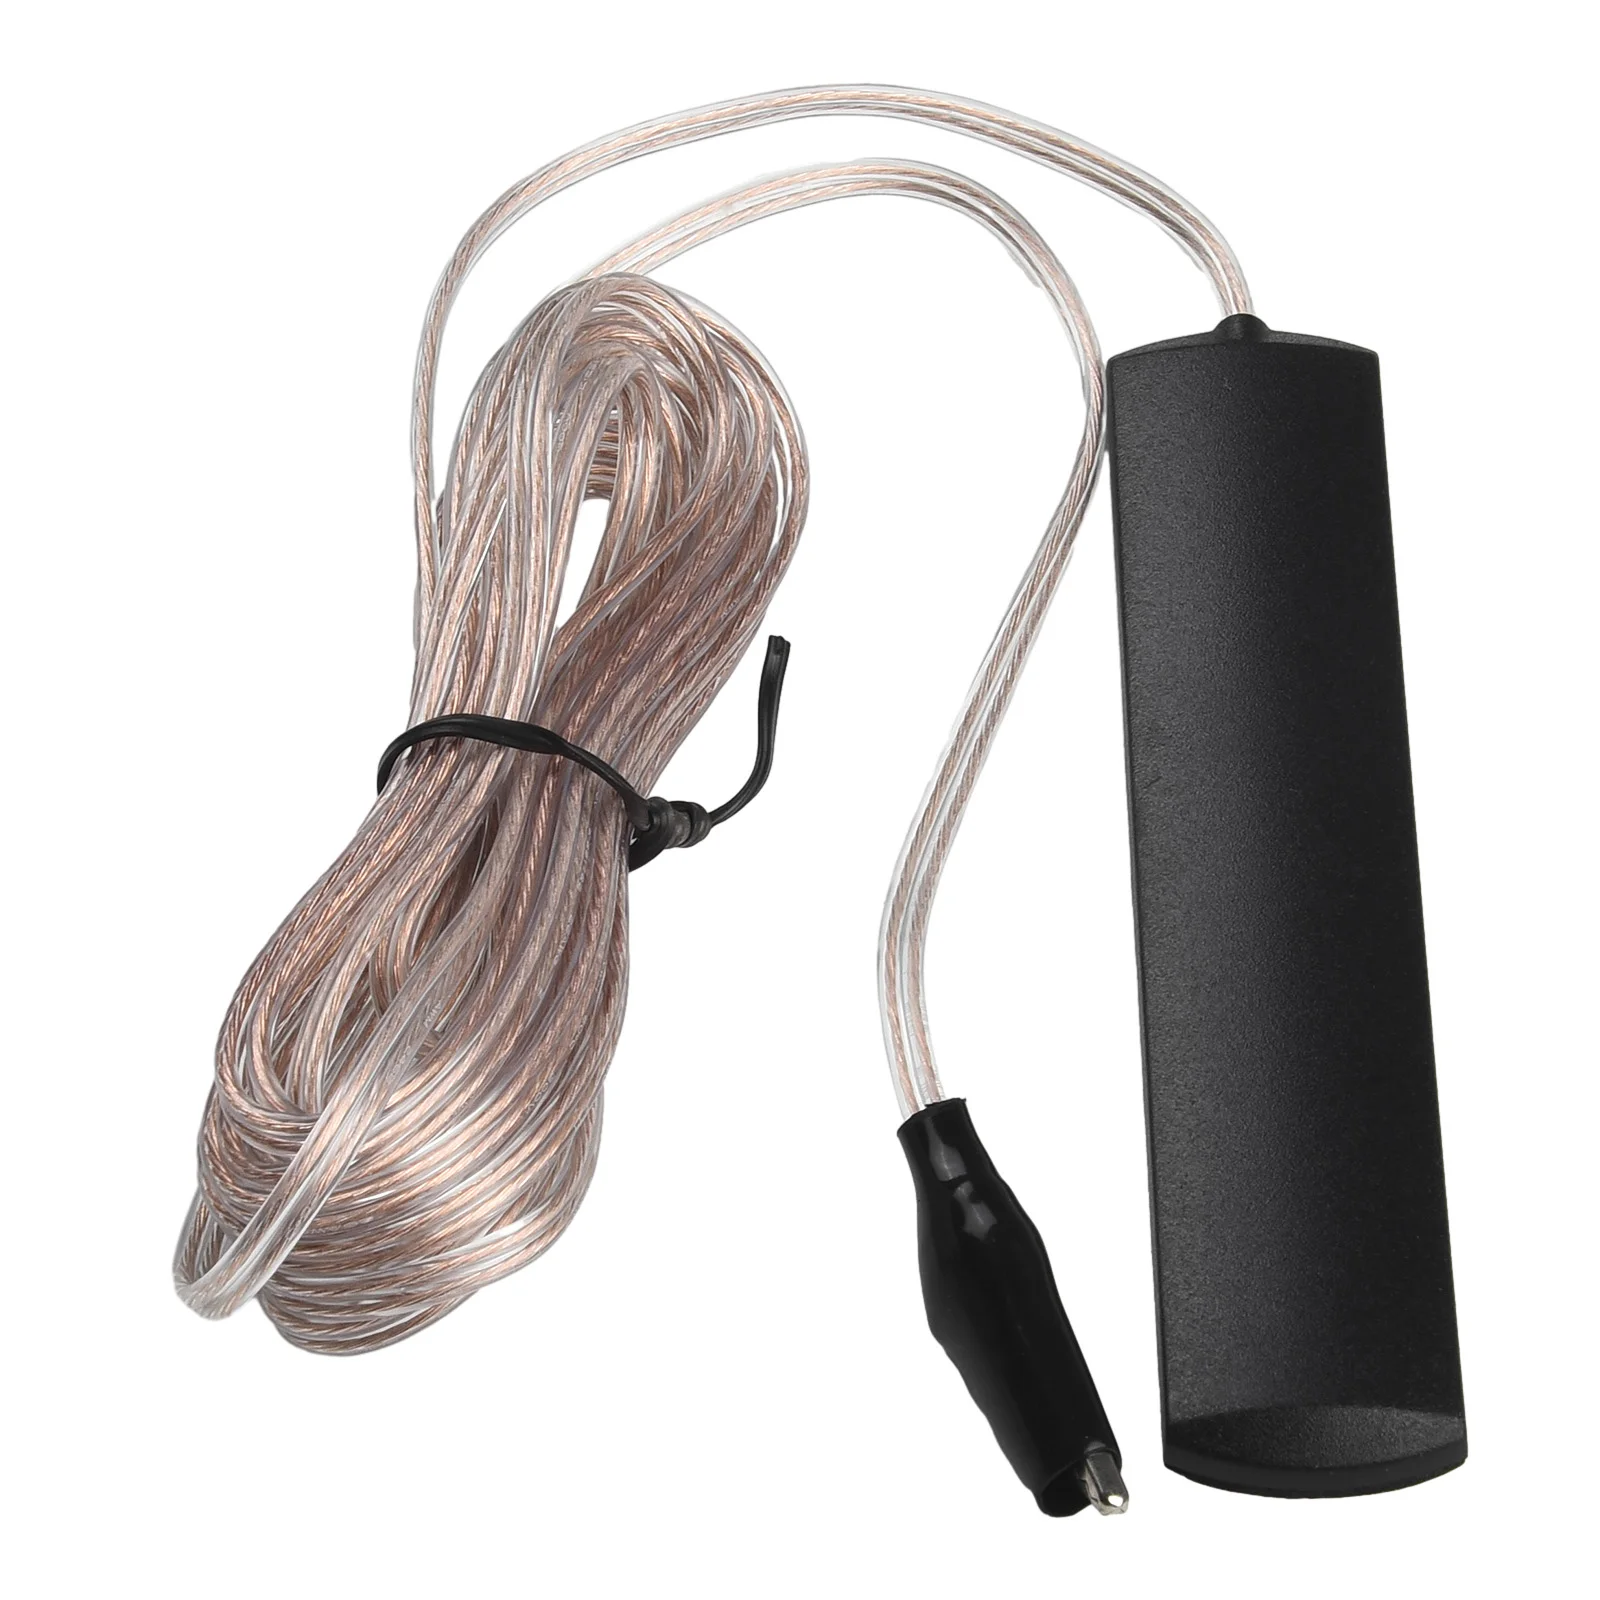 

Clip On Radio FM Stereo Antenna Indoor Length 5m Signal Enhance Stable Transfer Wide Compatible 3.2m Cable 85-112MHz